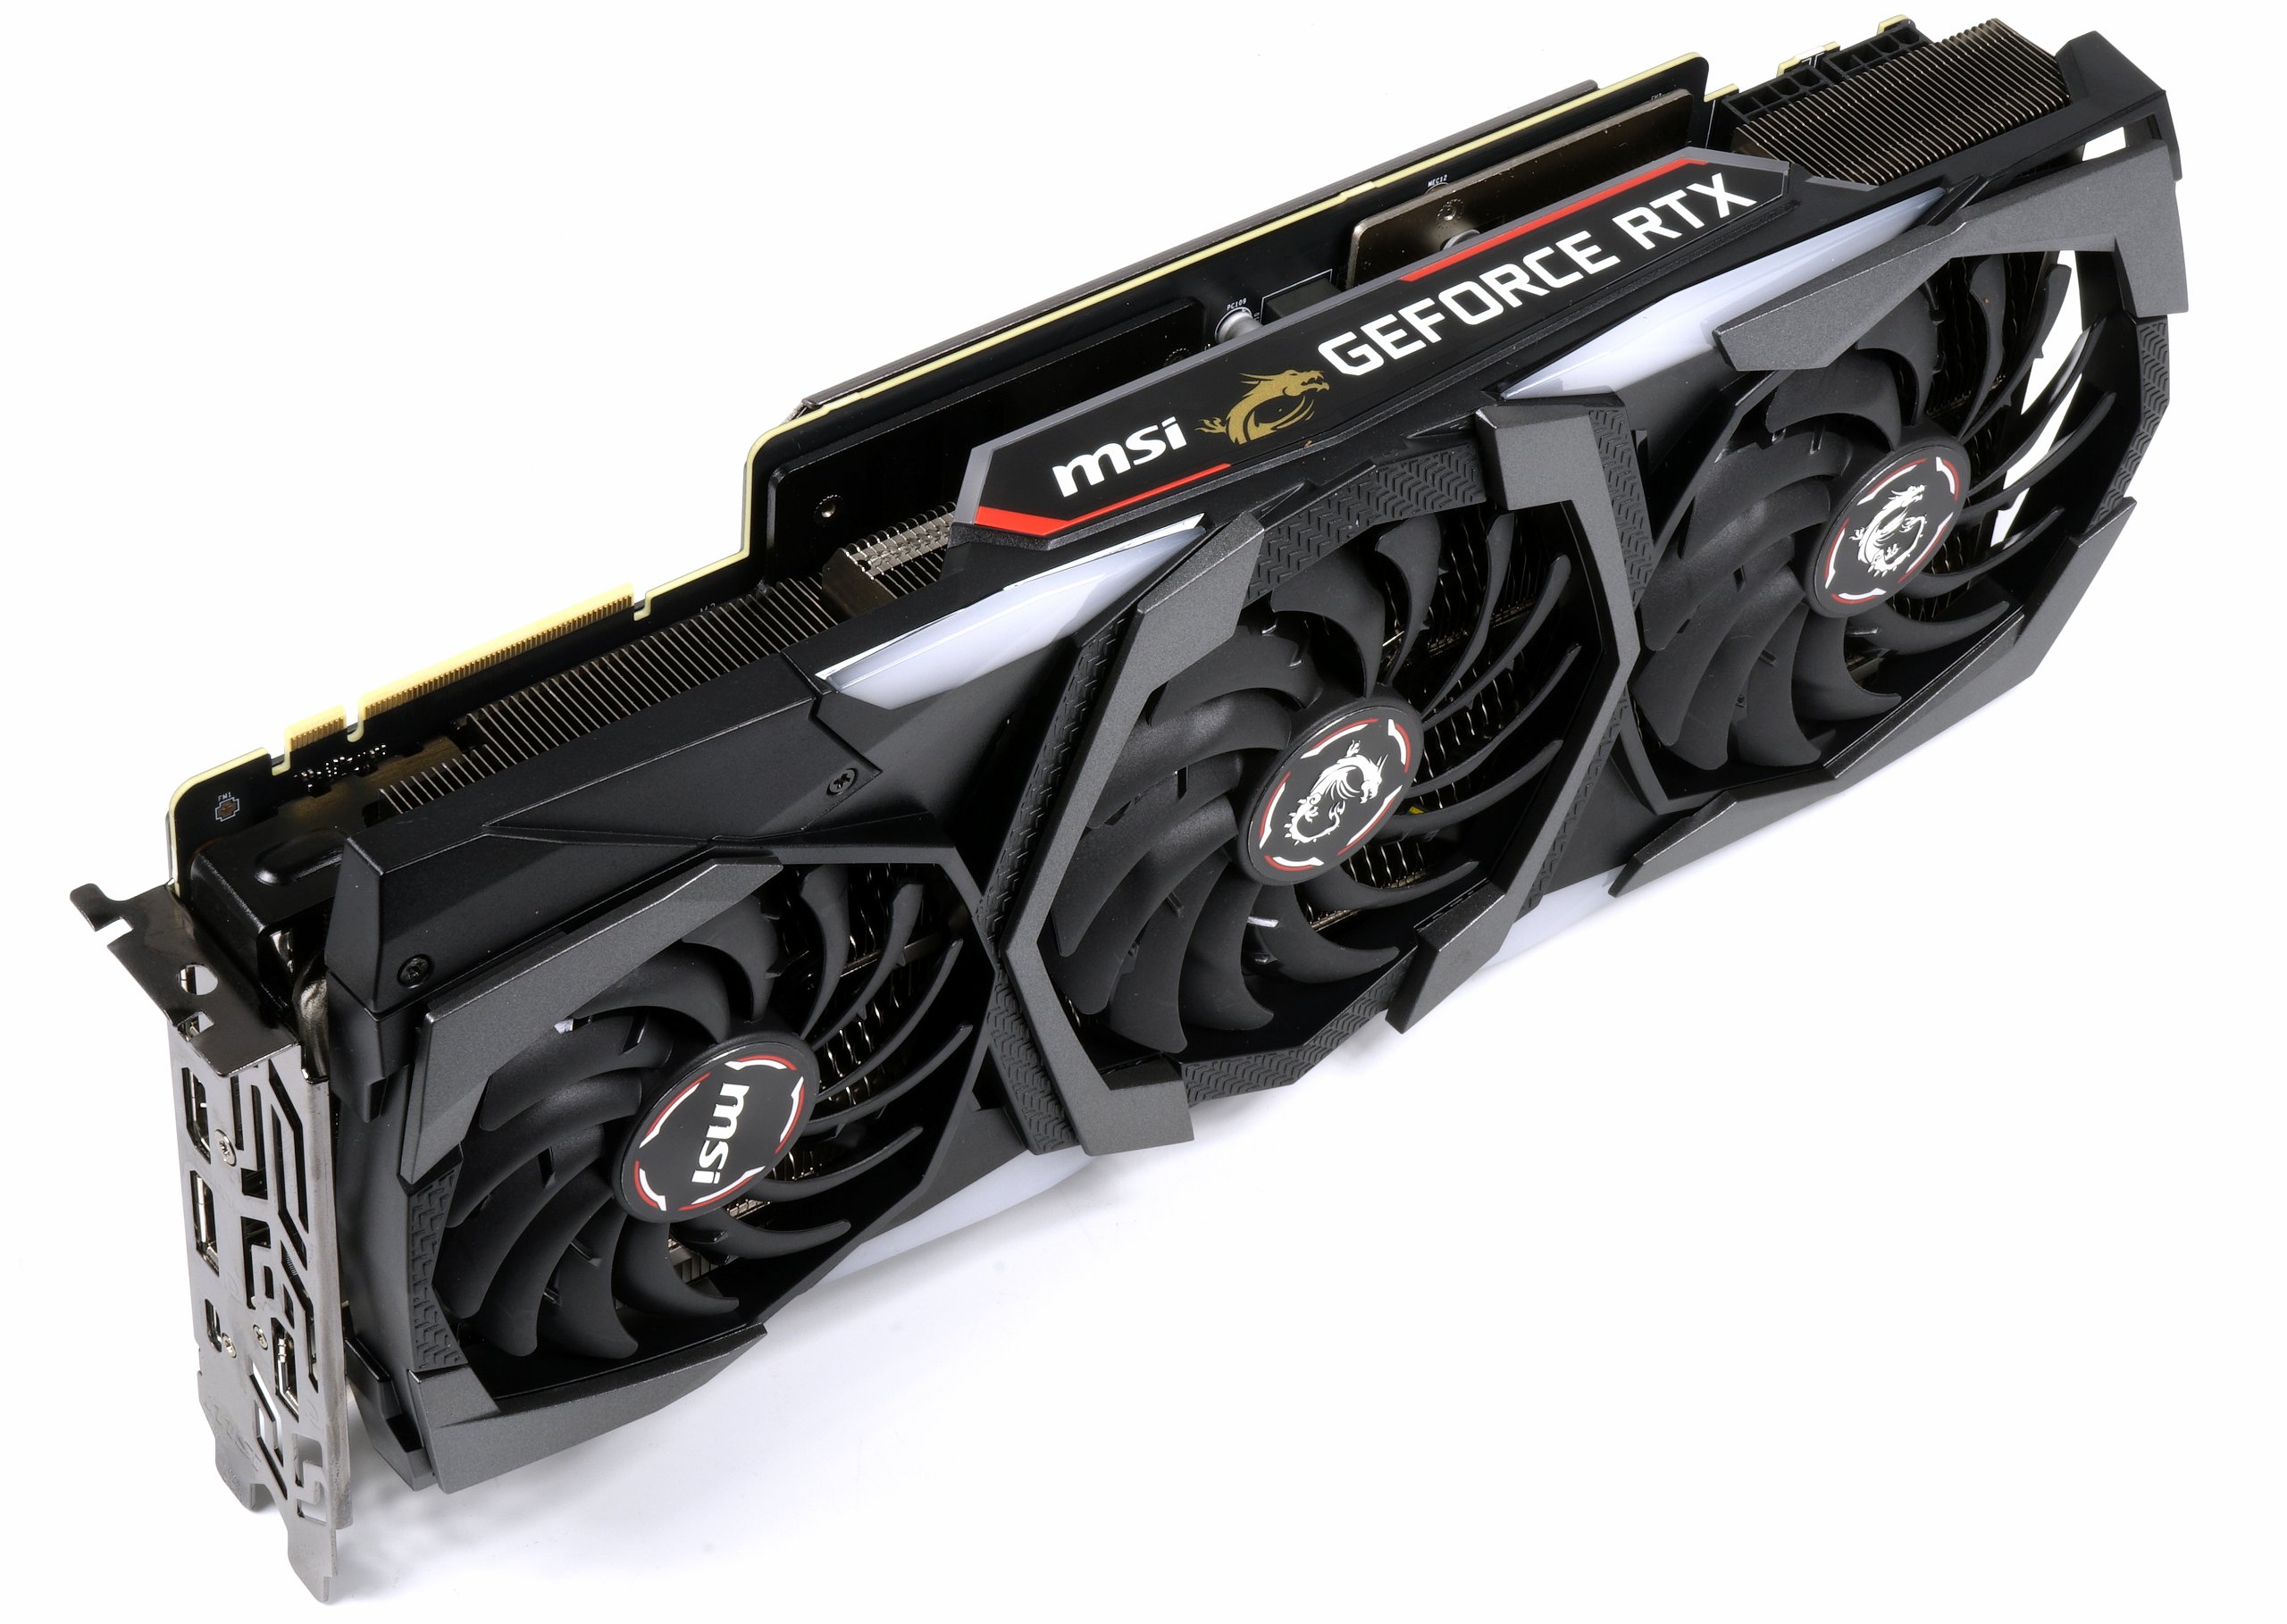 MSI GeForce RTX 2080 Gaming X Trio review - Quiet, fast, colorful